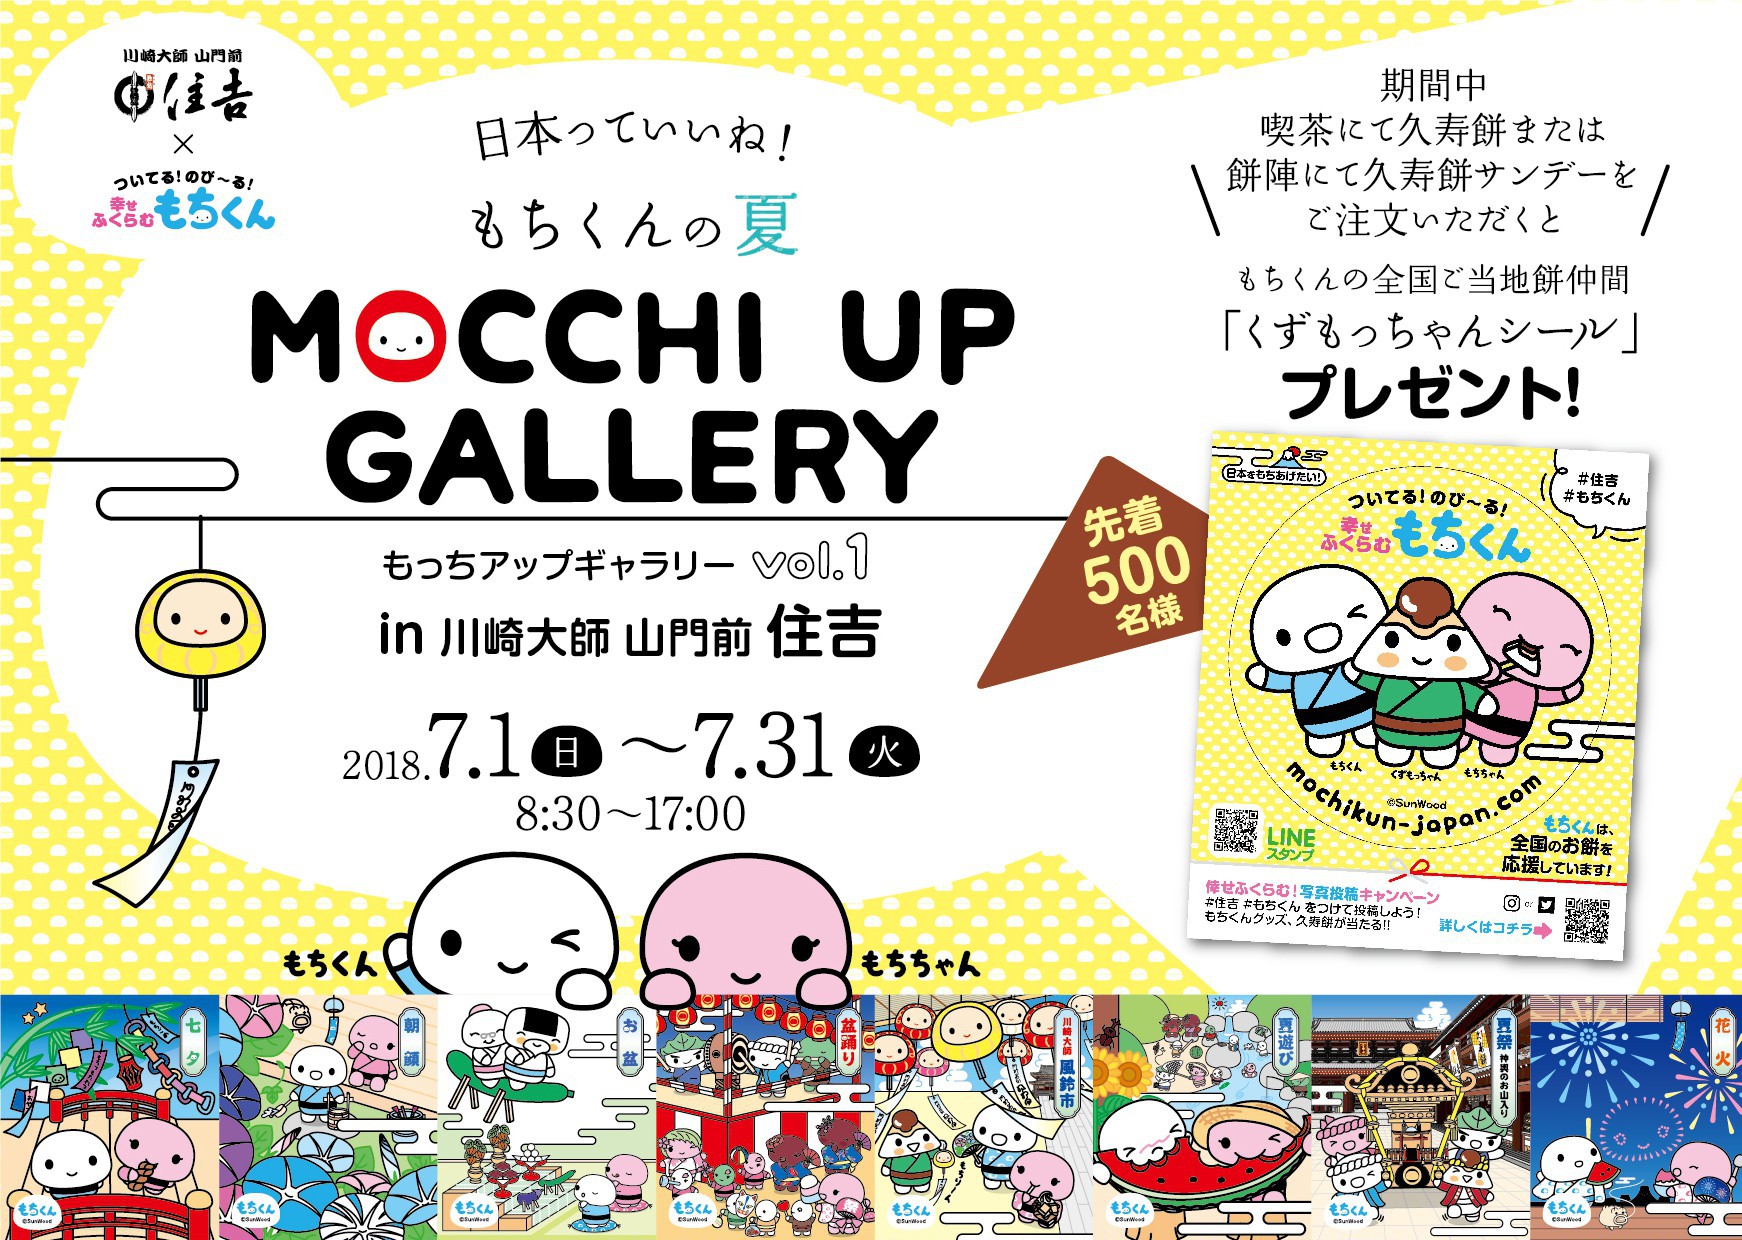 MOCCHI UP GALLERY Vol.1住吉